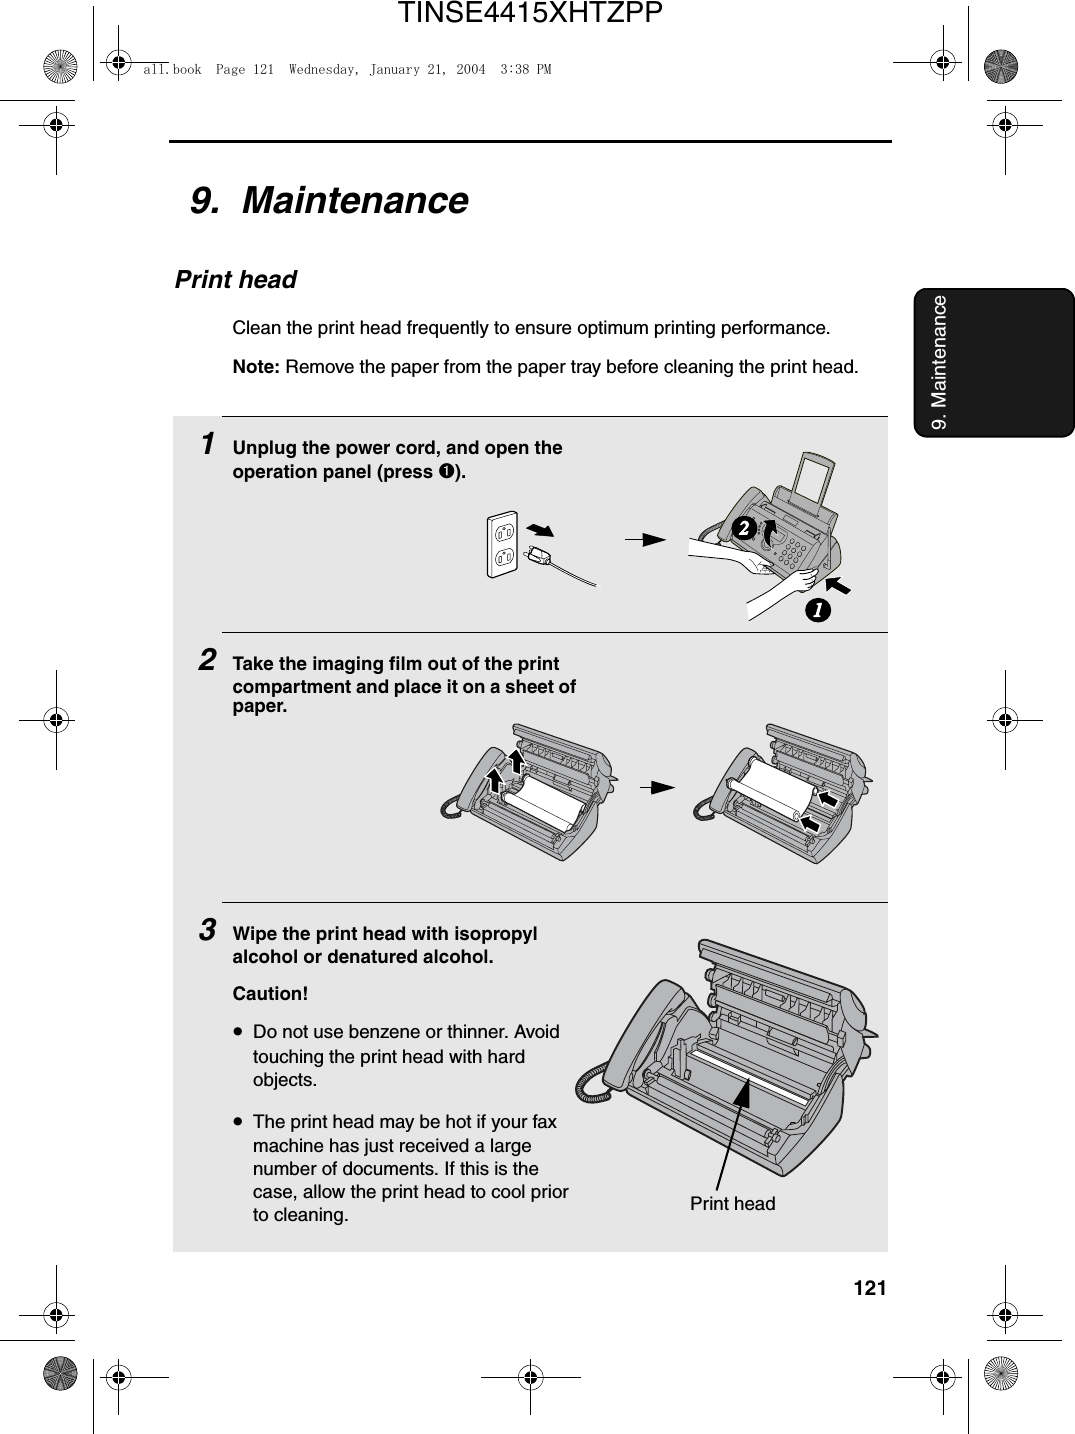 1219. Maintenance9.  MaintenancePrint headClean the print head frequently to ensure optimum printing performance.Note: Remove the paper from the paper tray before cleaning the print head.1Unplug the power cord, and open the operation panel (press ➊).2Take the imaging film out of the print compartment and place it on a sheet of paper.3Wipe the print head with isopropyl alcohol or denatured alcohol.Caution!•Do not use benzene or thinner. Avoid touching the print head with hard objects.•The print head may be hot if your fax machine has just received a large number of documents. If this is the case, allow the print head to cool prior to cleaning.12Print headall.book  Page 121  Wednesday, January 21, 2004  3:38 PMTINSE4415XHTZPP